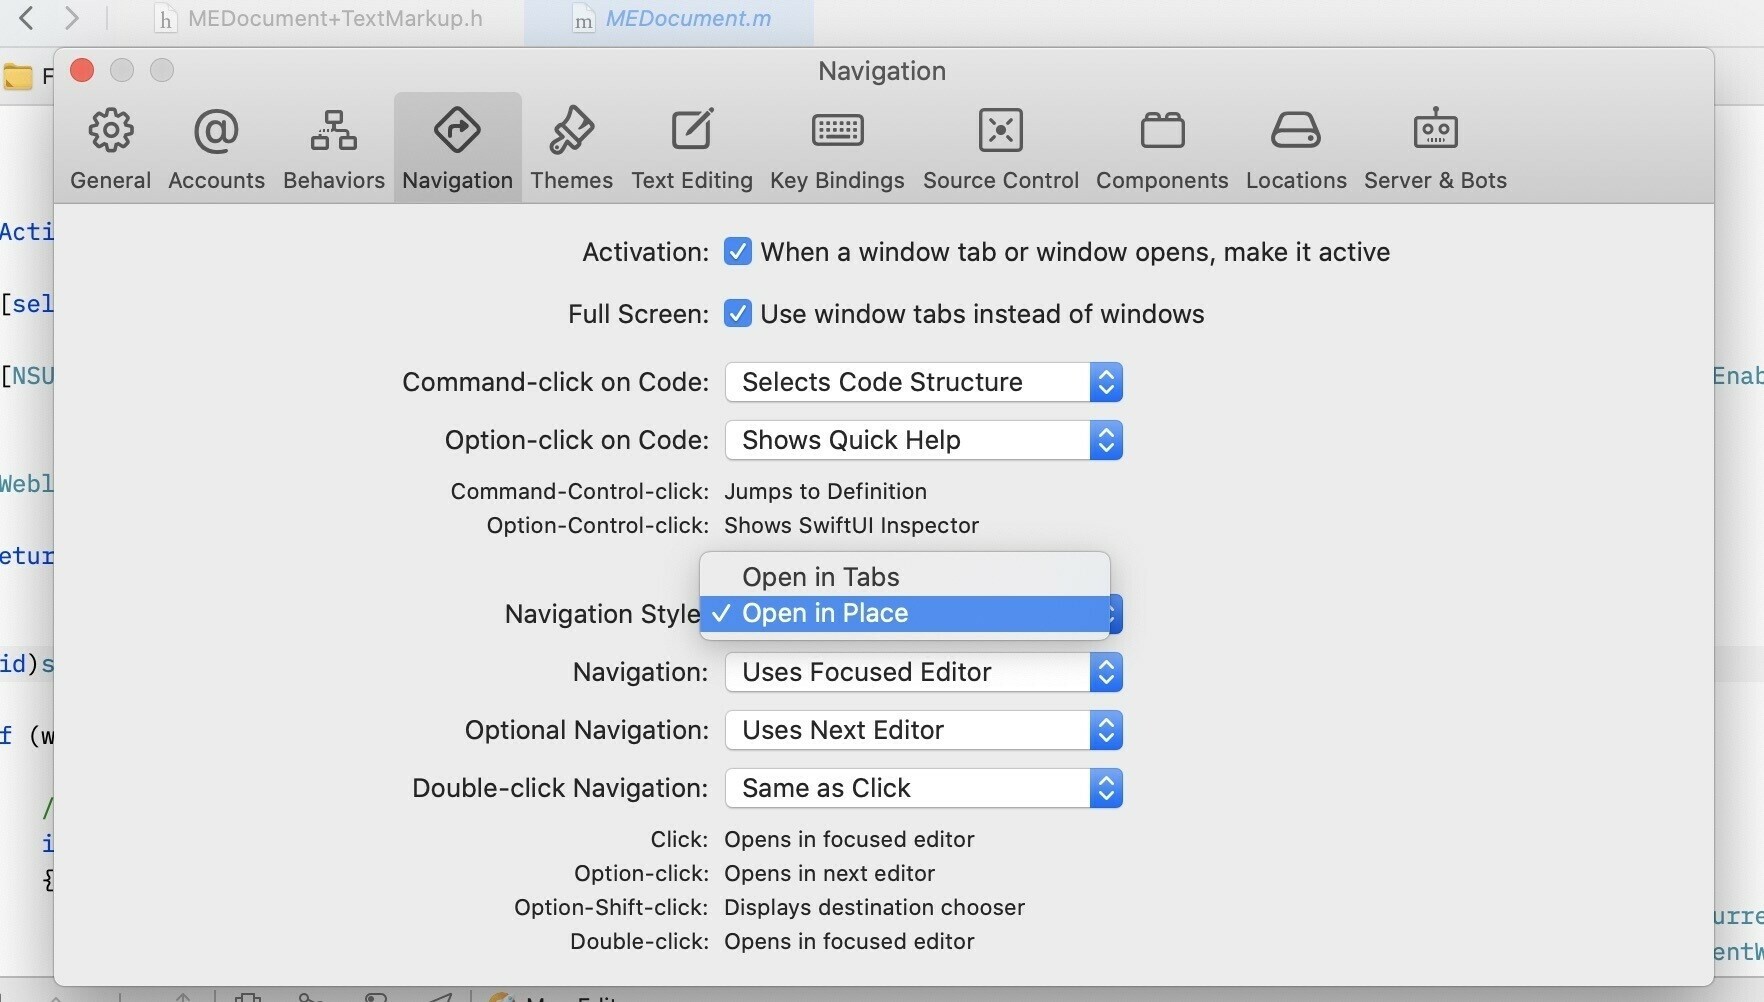 Screenshot of Xcode preferences showing an option for "Navigation Style" with a popup menu offering to "Open in Tabs" or "Open in Place".